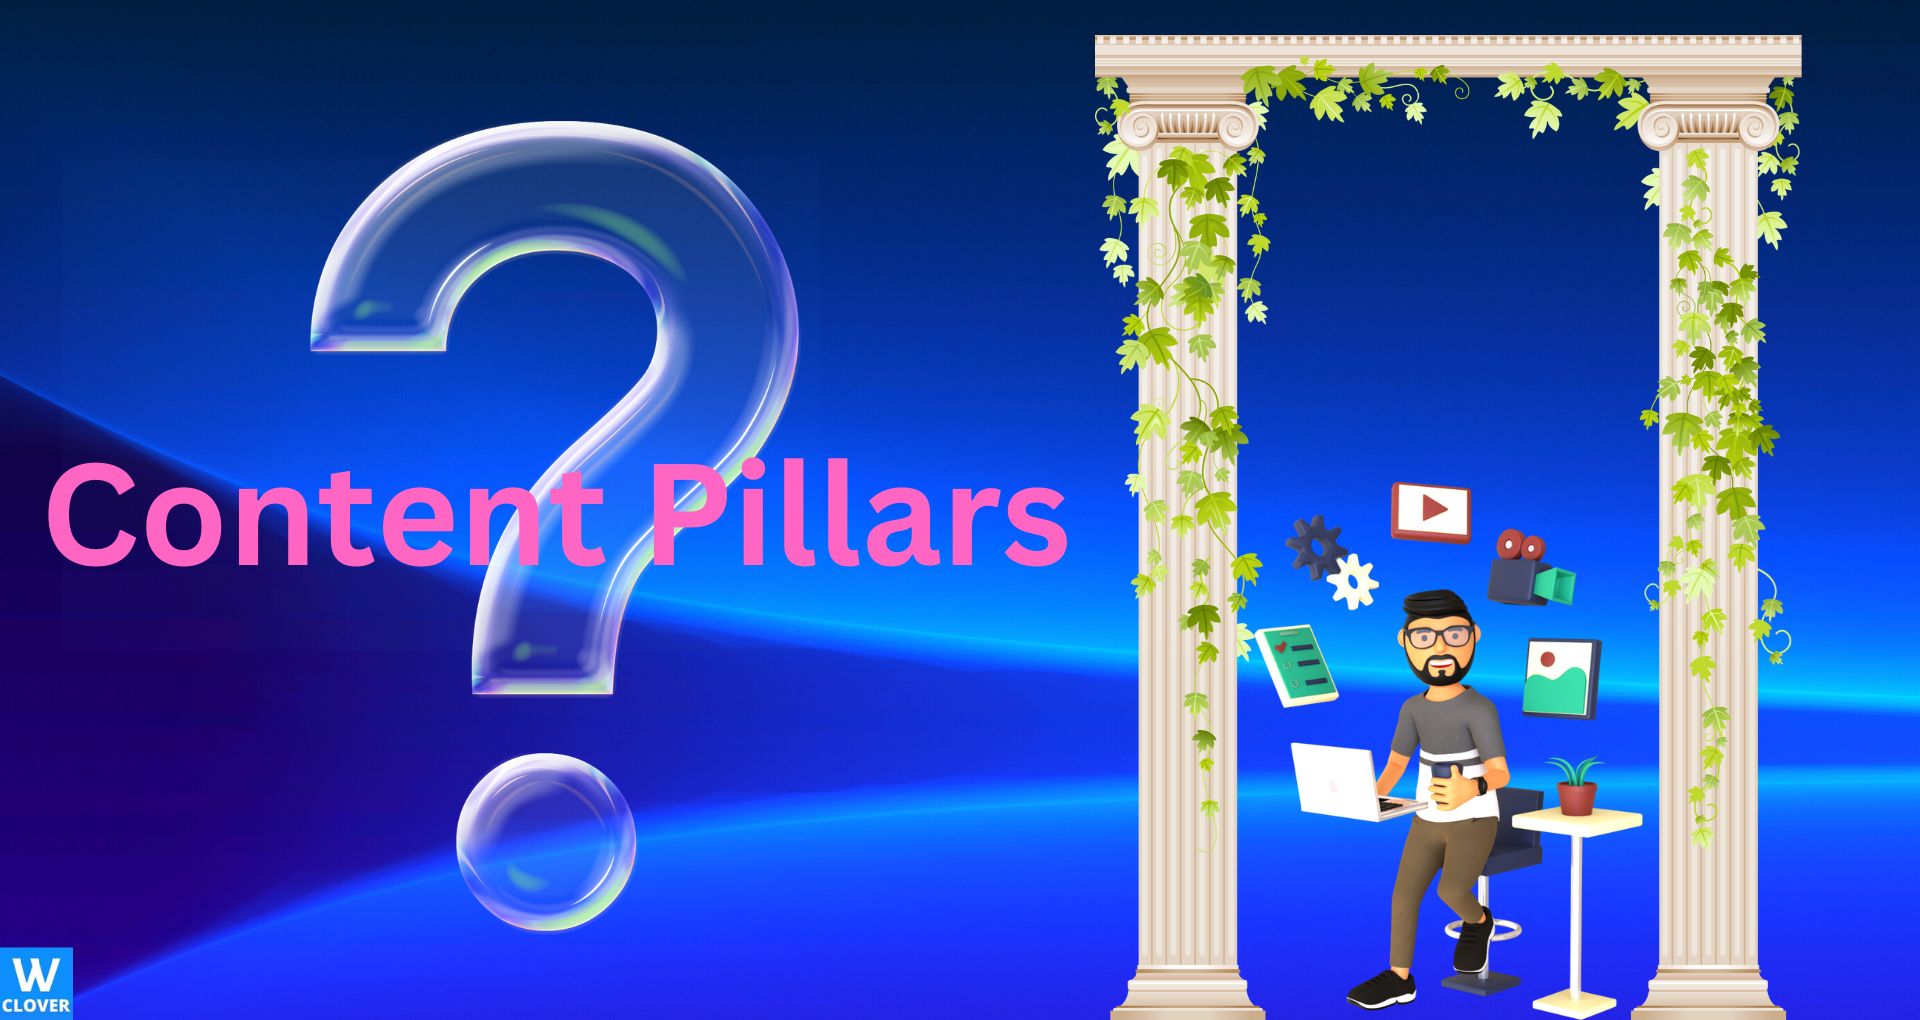 Content Pillars graphics of man with glasses on a laptop with two pillars on blue background